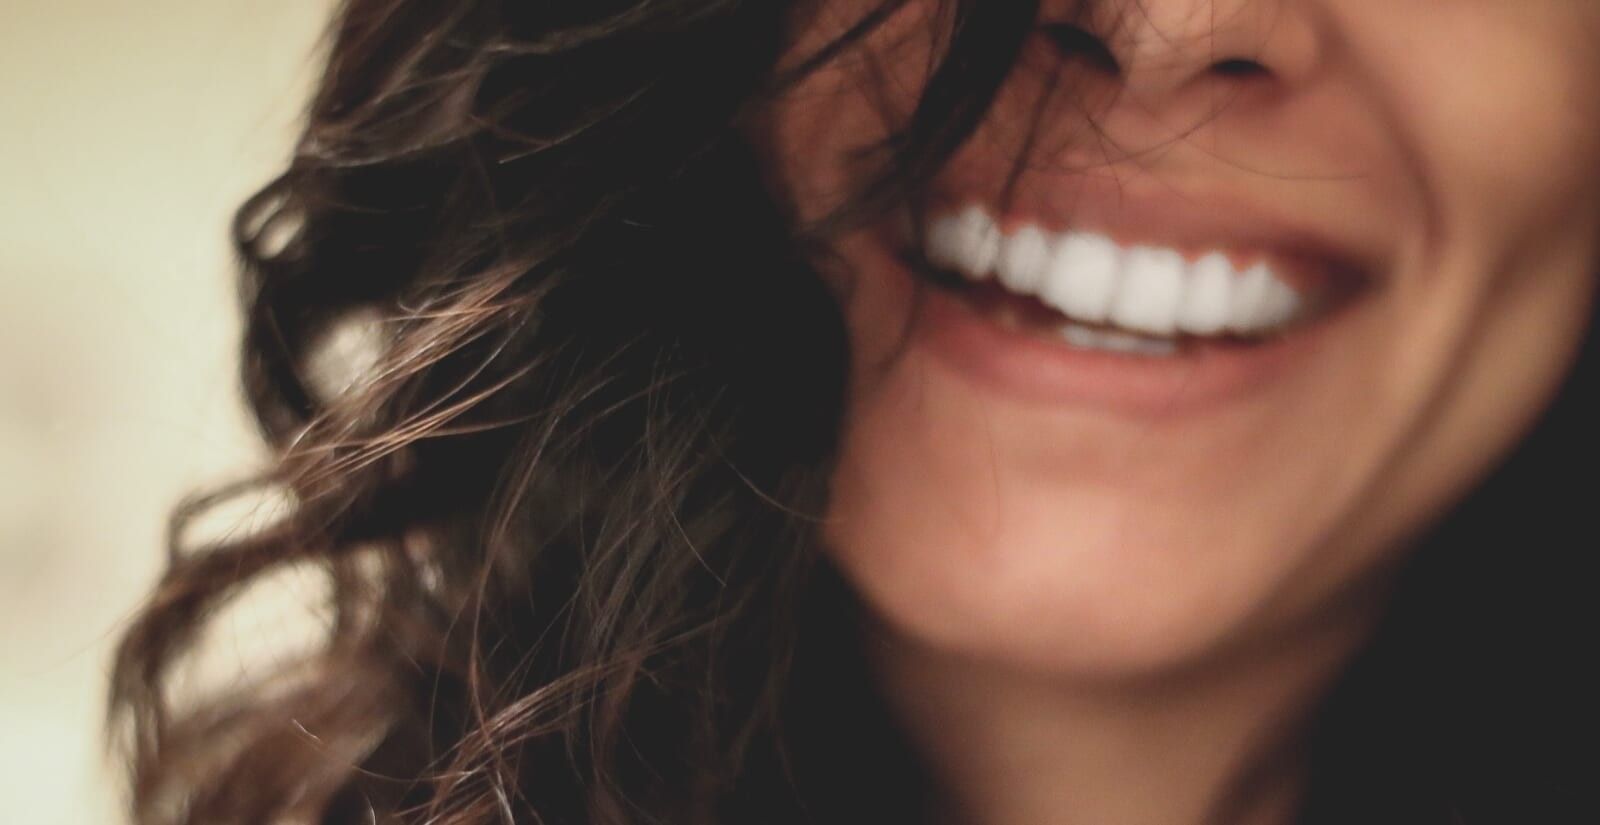 smiling woman shows her teeth